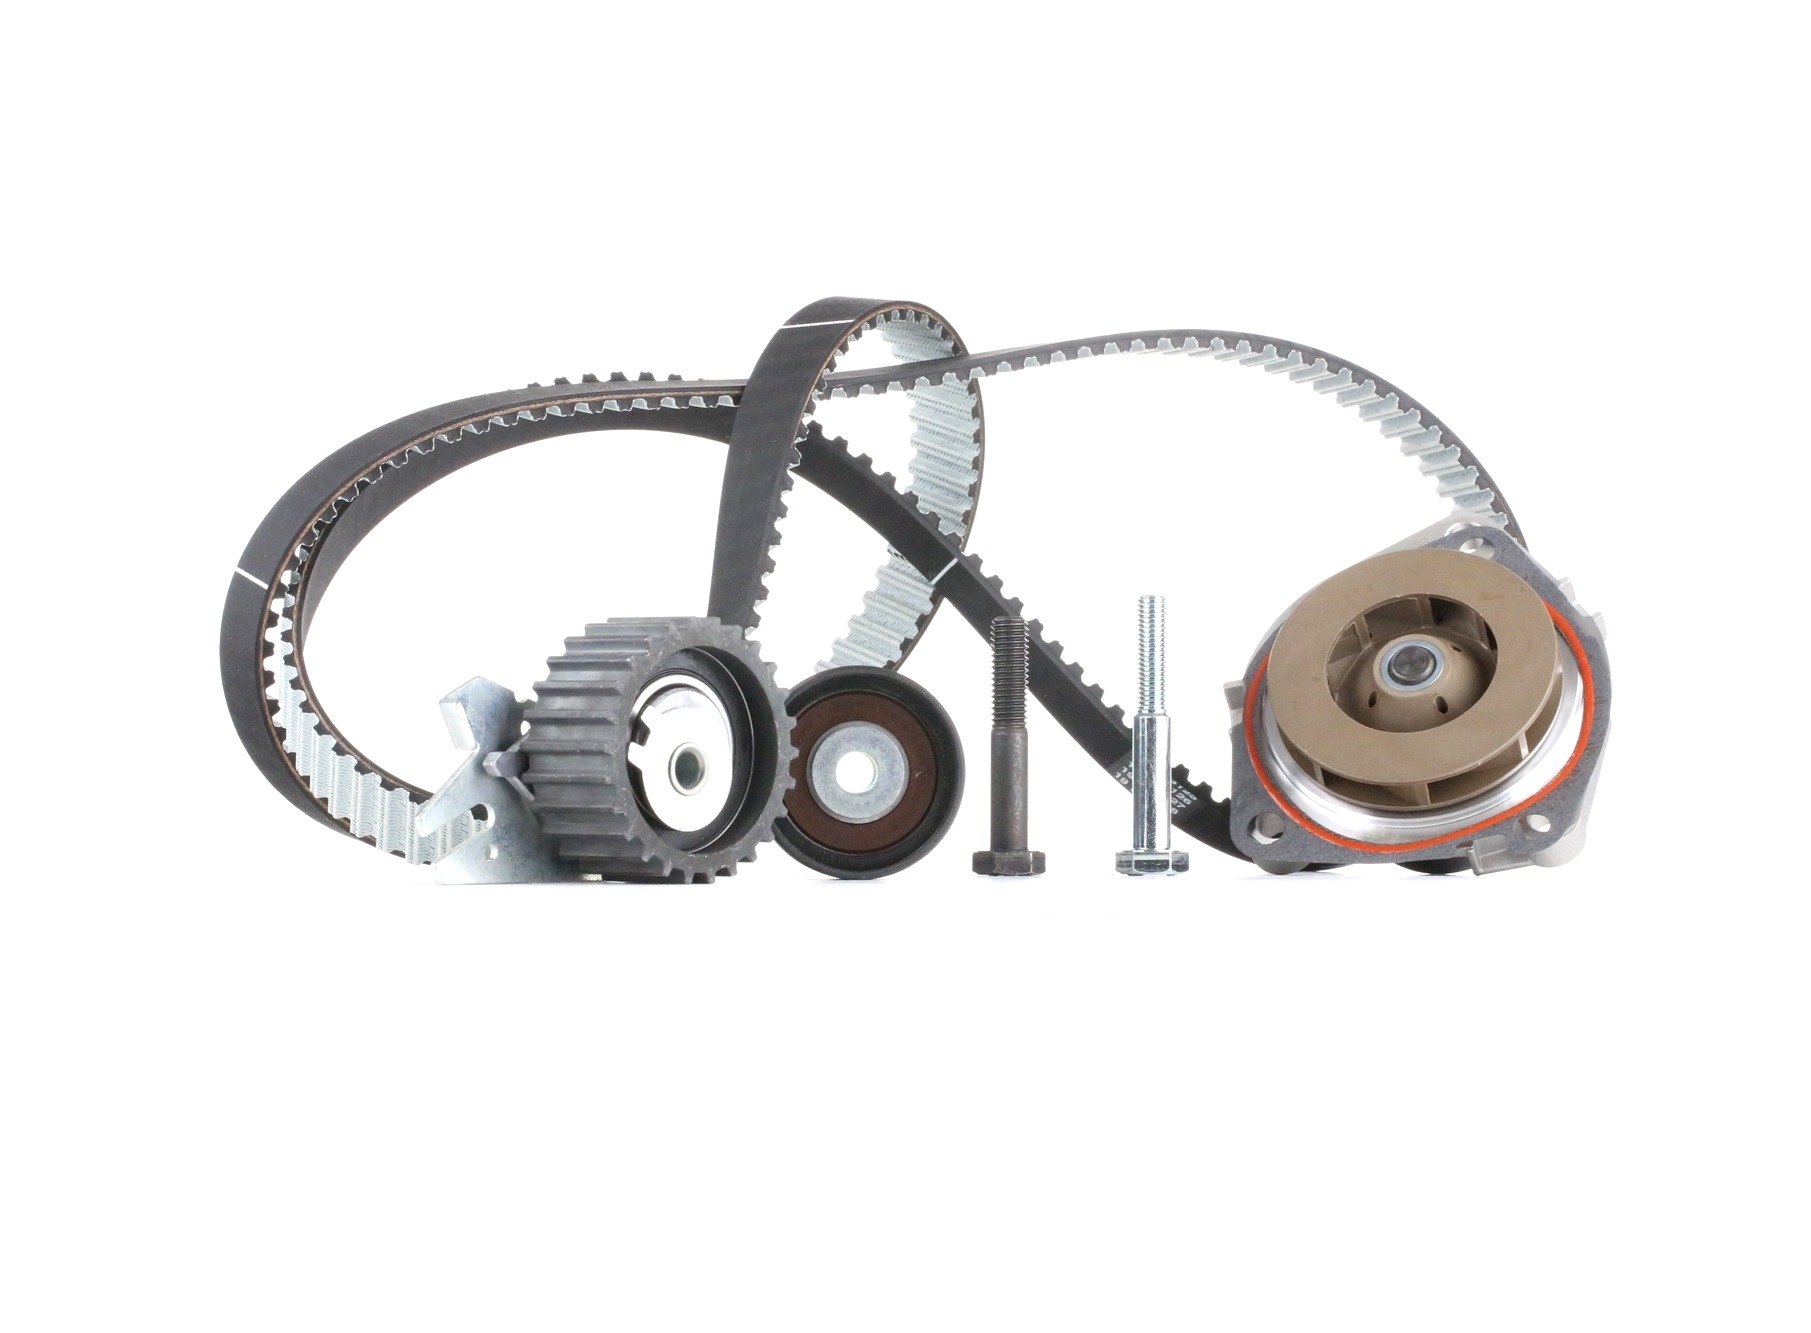 MAGNETI MARELLI 132011160073 Water pump and timing belt kit Number of Teeth: 199 L: 1599 mm, Width: 24 mm